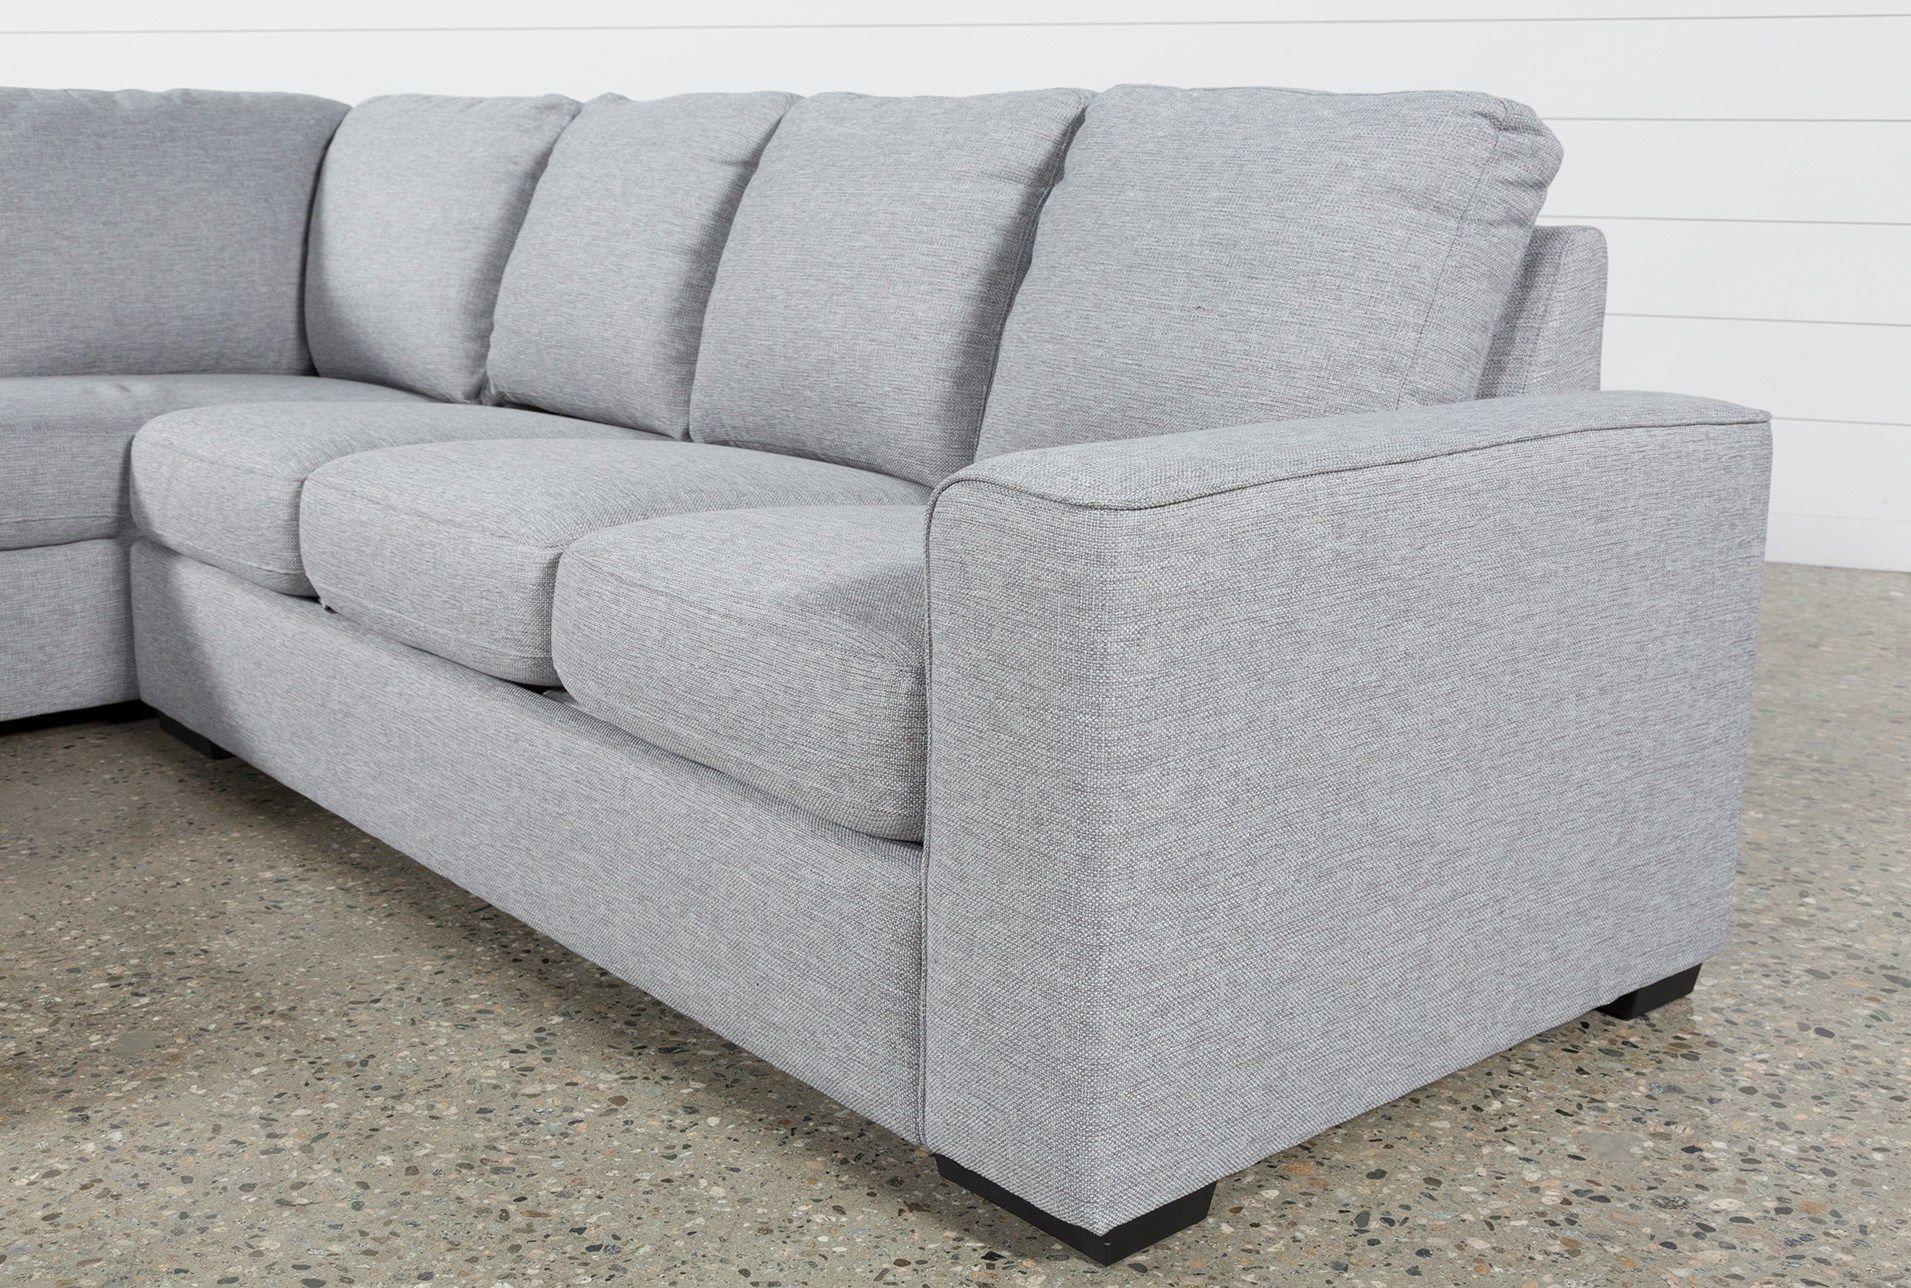 Lucy Grey 2 Piece Sectional W/laf Chaise | Gray And Room Inside Arrowmask 2 Piece Sectionals With Laf Chaise (View 9 of 30)